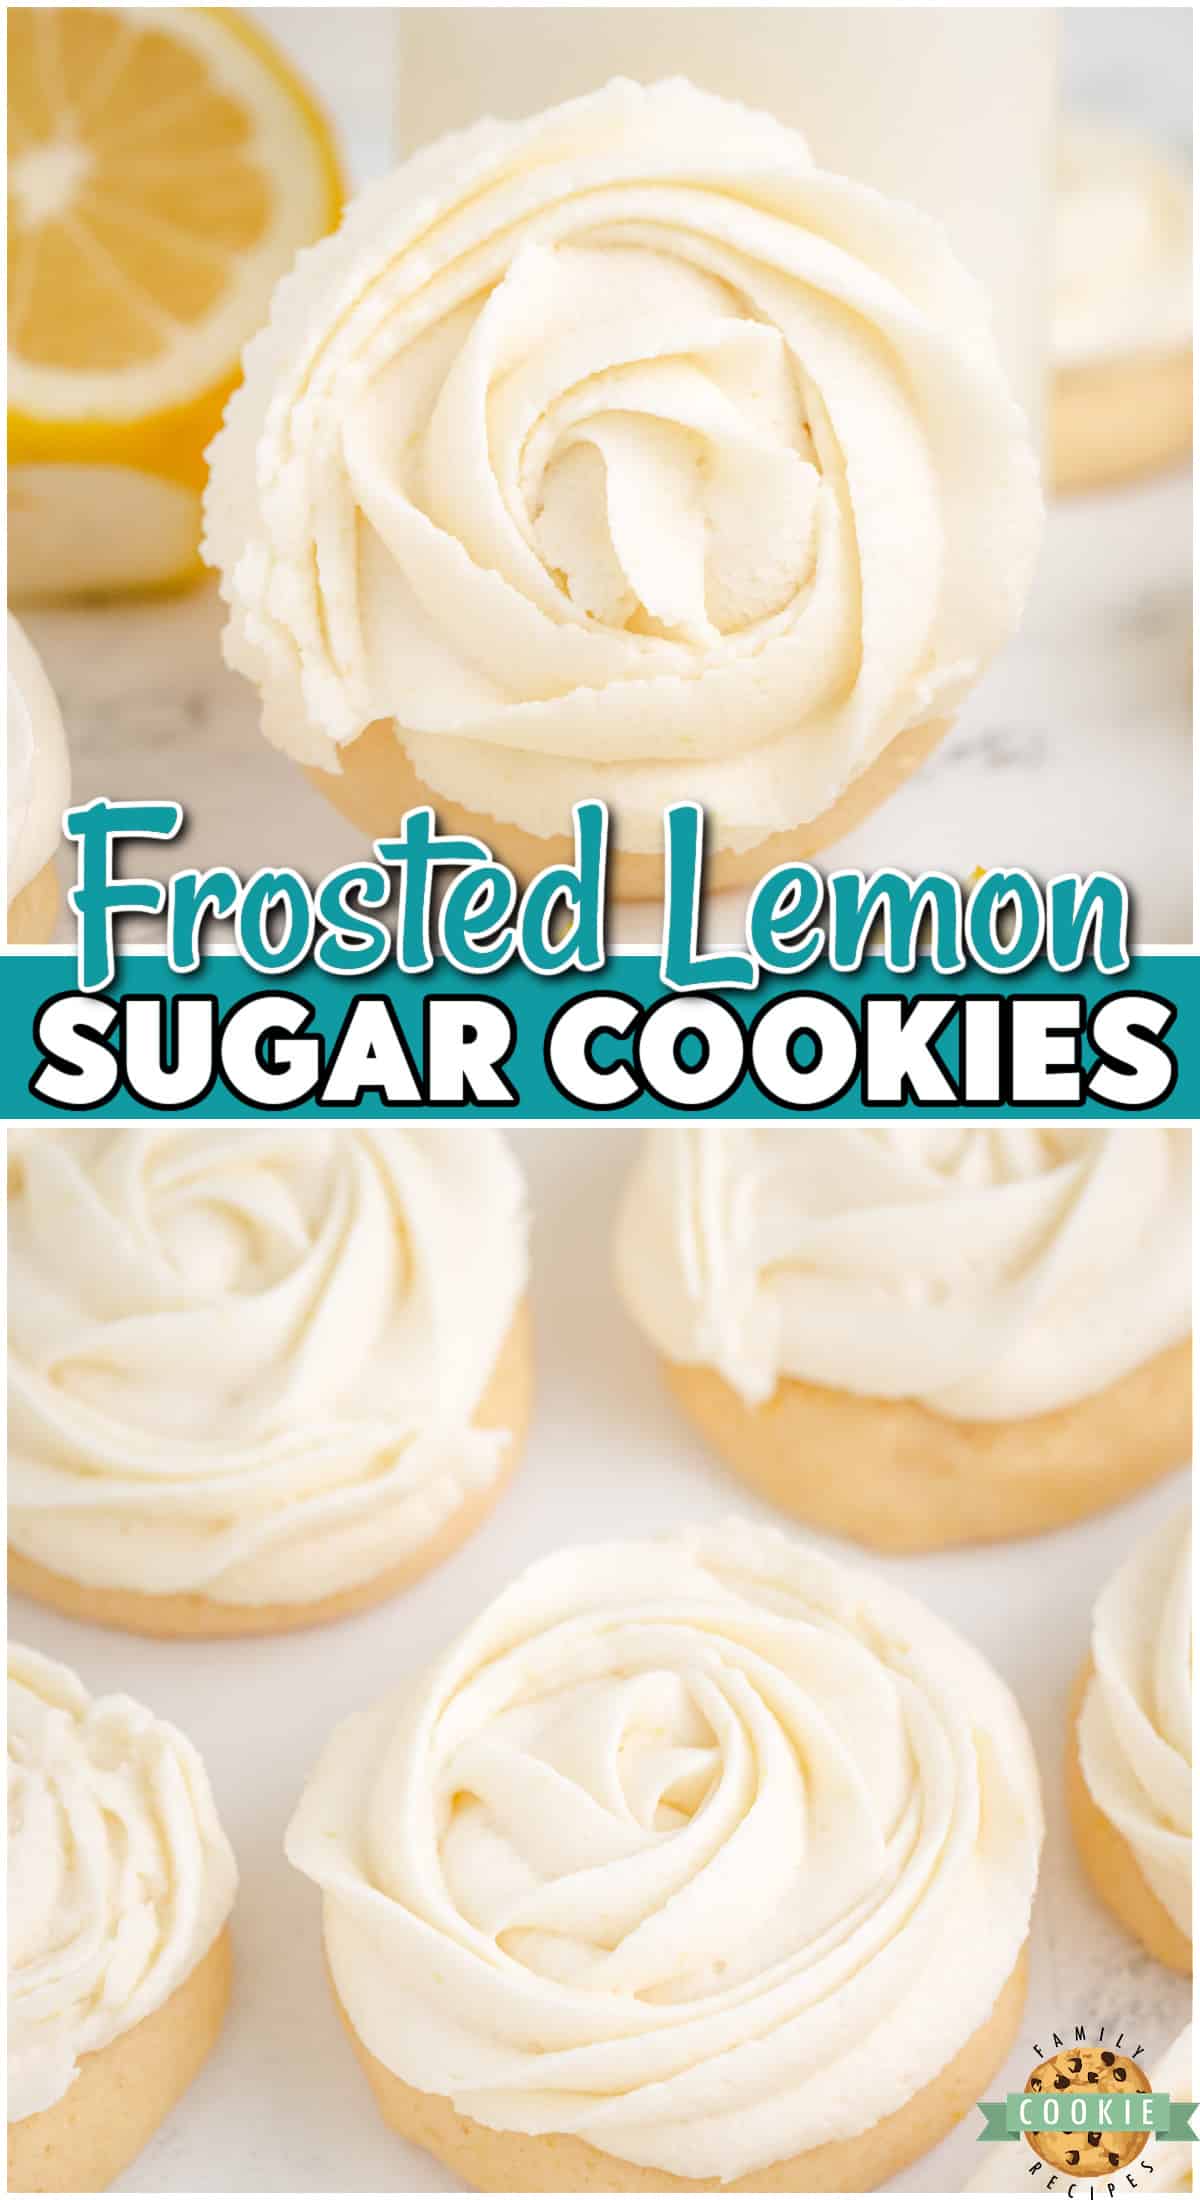 Frosted Lemon Sugar Cookies made by adding fresh lemon juice and zest to a simple sugar cookie dough. Easy Lemon Cookies piped with a super simple rosette, so they taste incredible and they're pretty too!